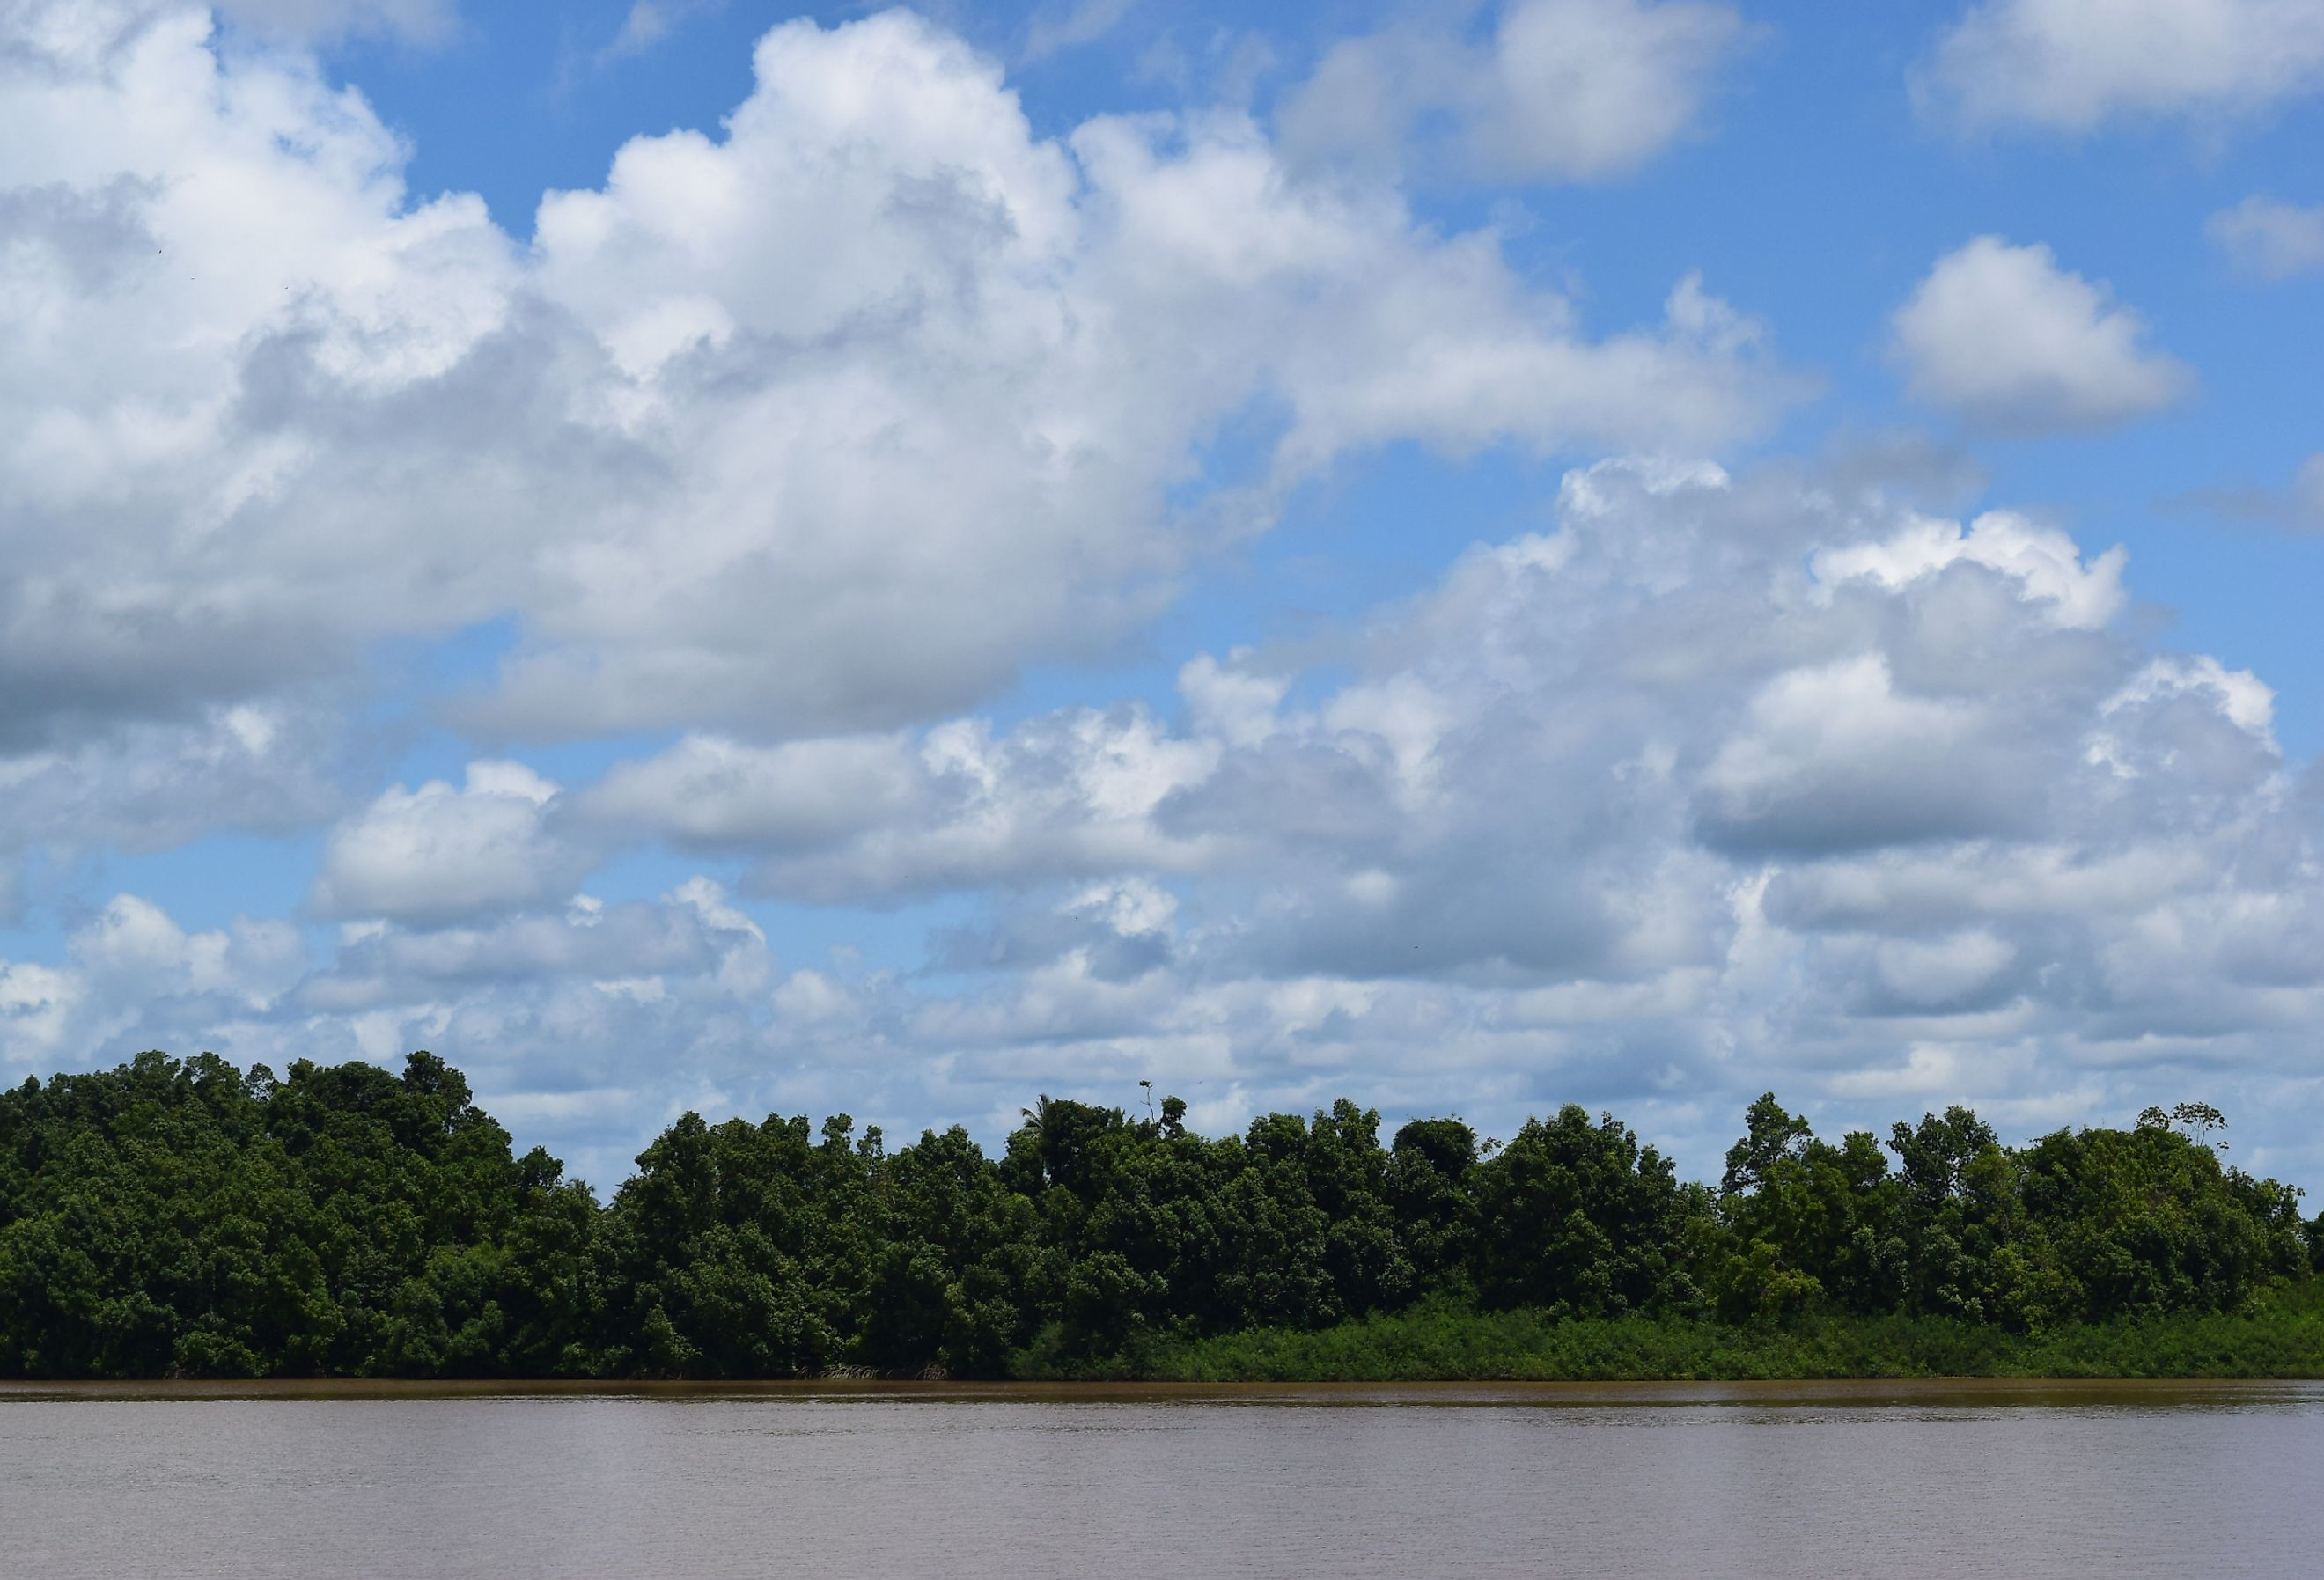 Corantijn River (Courantyne River) at the border of Guyana and Suriname in South America with trees lining the banks.